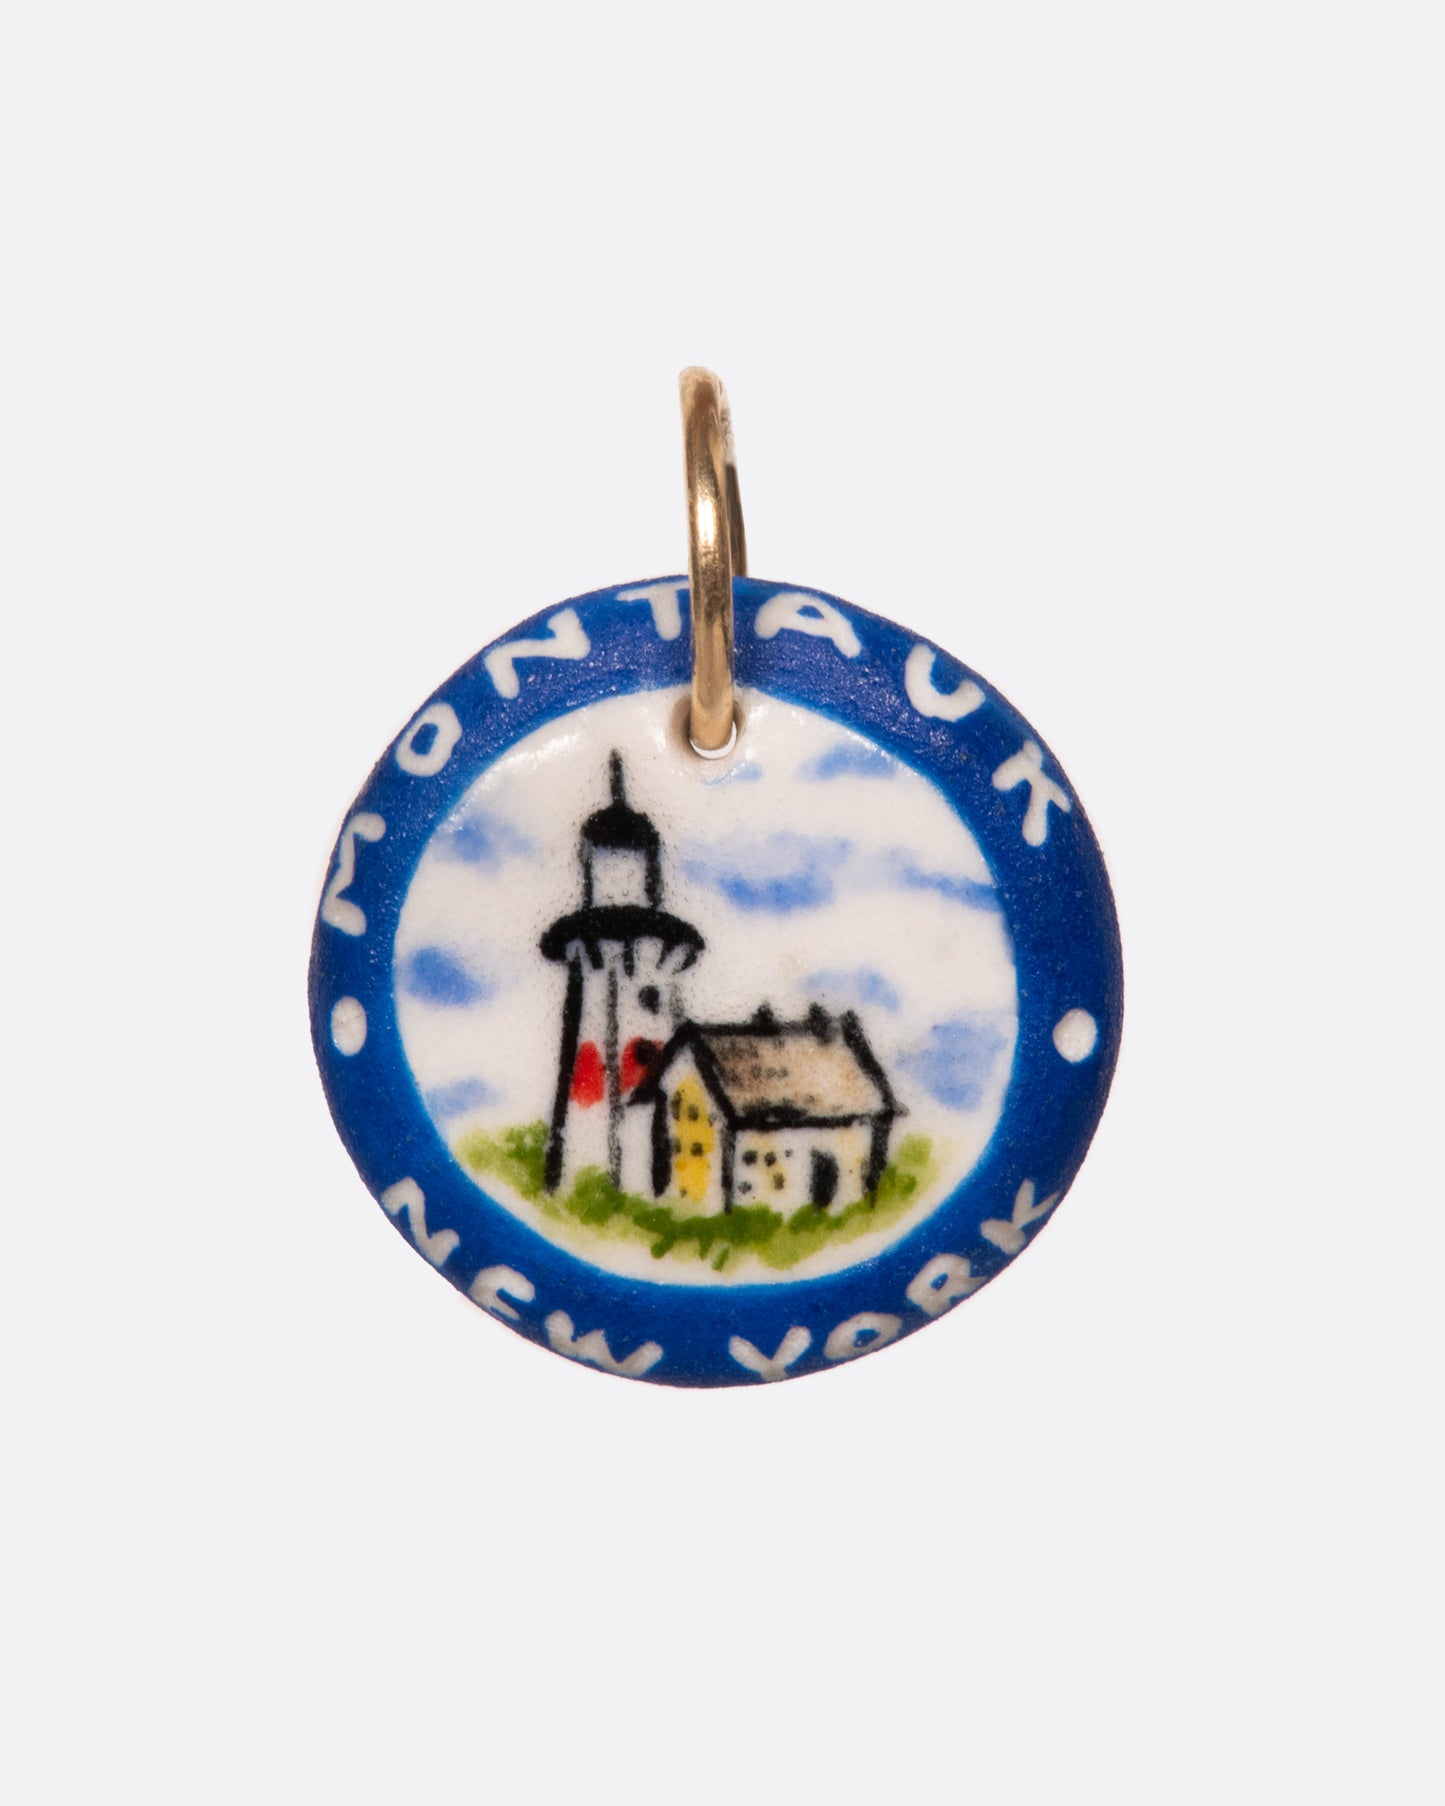 A round porcelain medallion, hand painted with the iconic Montauk lighthouse.